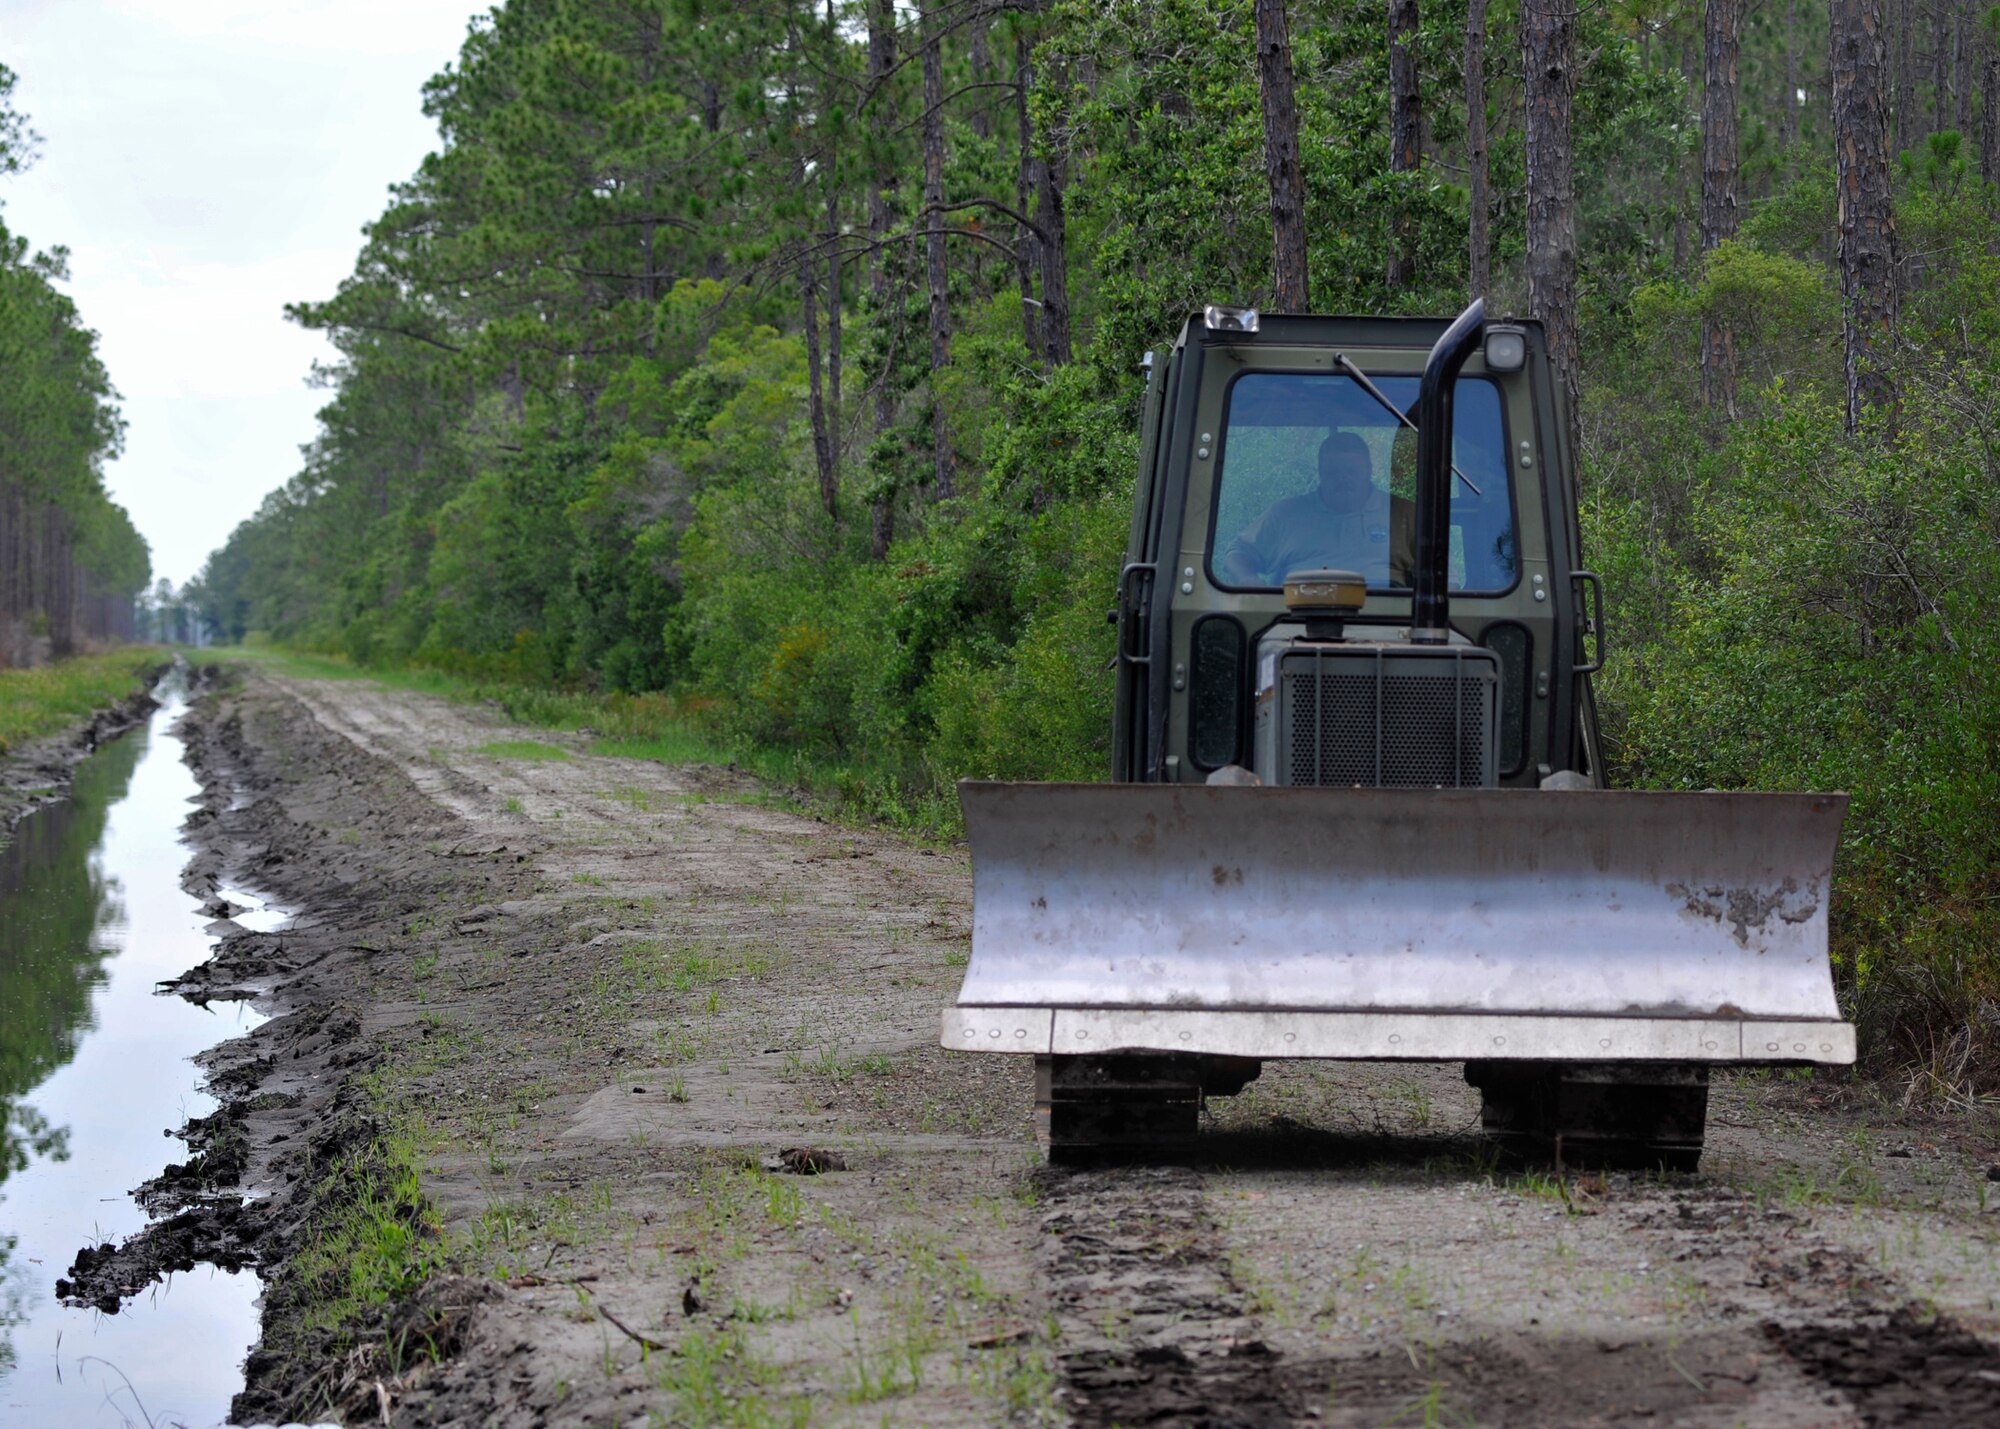 Richard Turner, a forest technician assigned to the 325th Civil Engineer Squadron Natural Resources forest management section, drives a tractor in preperation for road reestablishing at Tyndall Air Force Base, Fla., June 14, 2016. Forest management supports the Tyndall mission by providing wildfire protection, forest enhancement and restoration, endangered species and wildlife habitiat improvement and recreational development. (U.S. Air Force photo by Senior Airman Sergio A. Gamboa/Released)